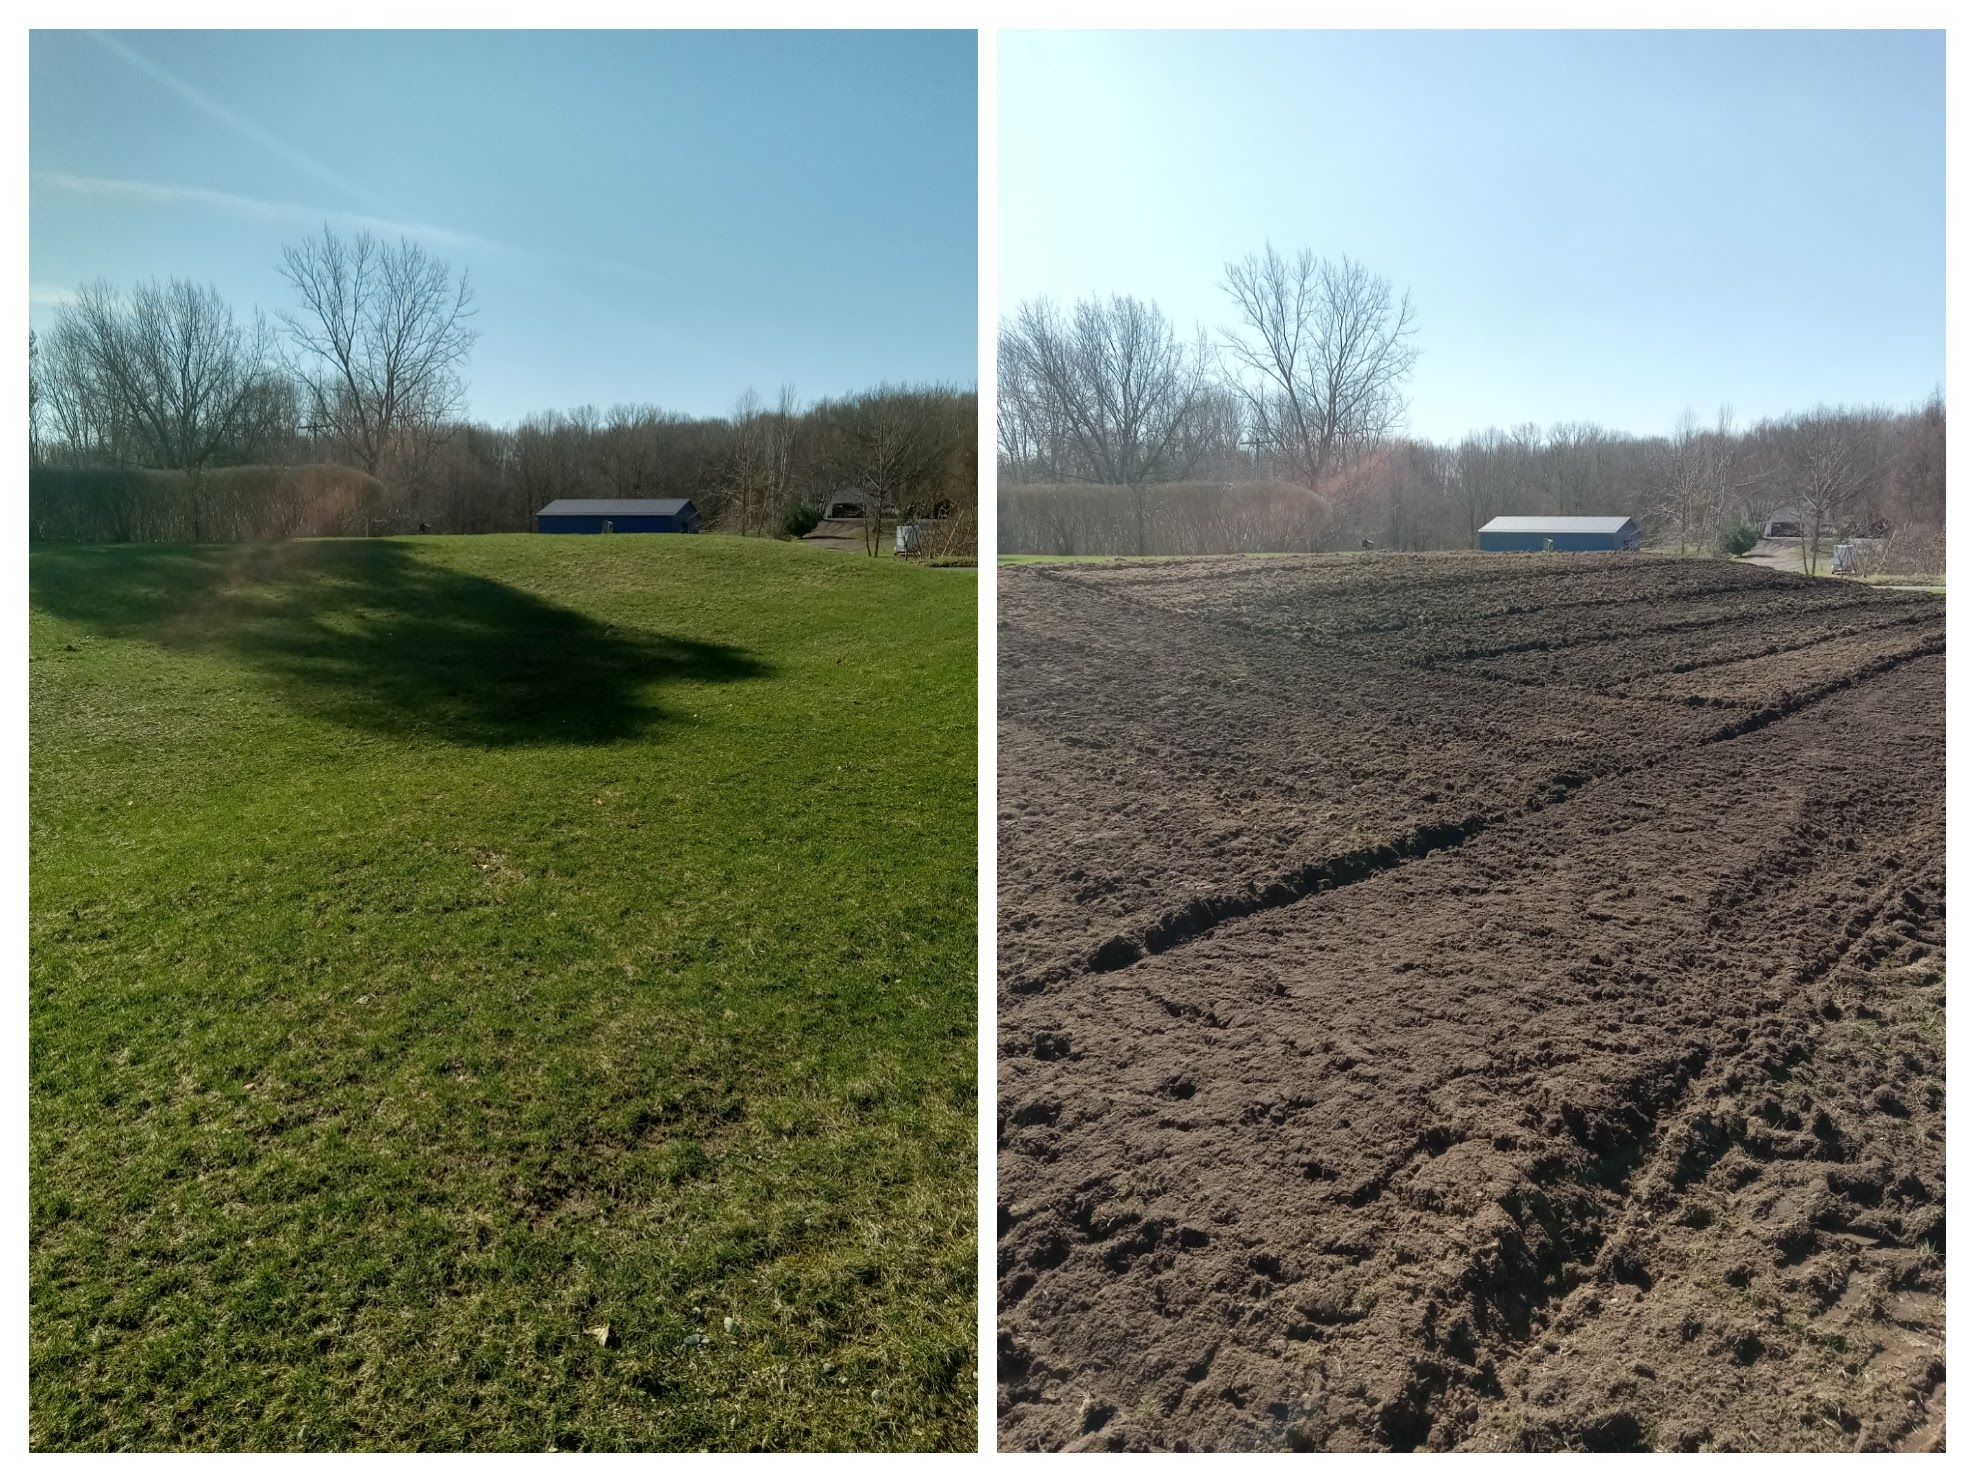 From a rough field to a smooth yard  transformation!